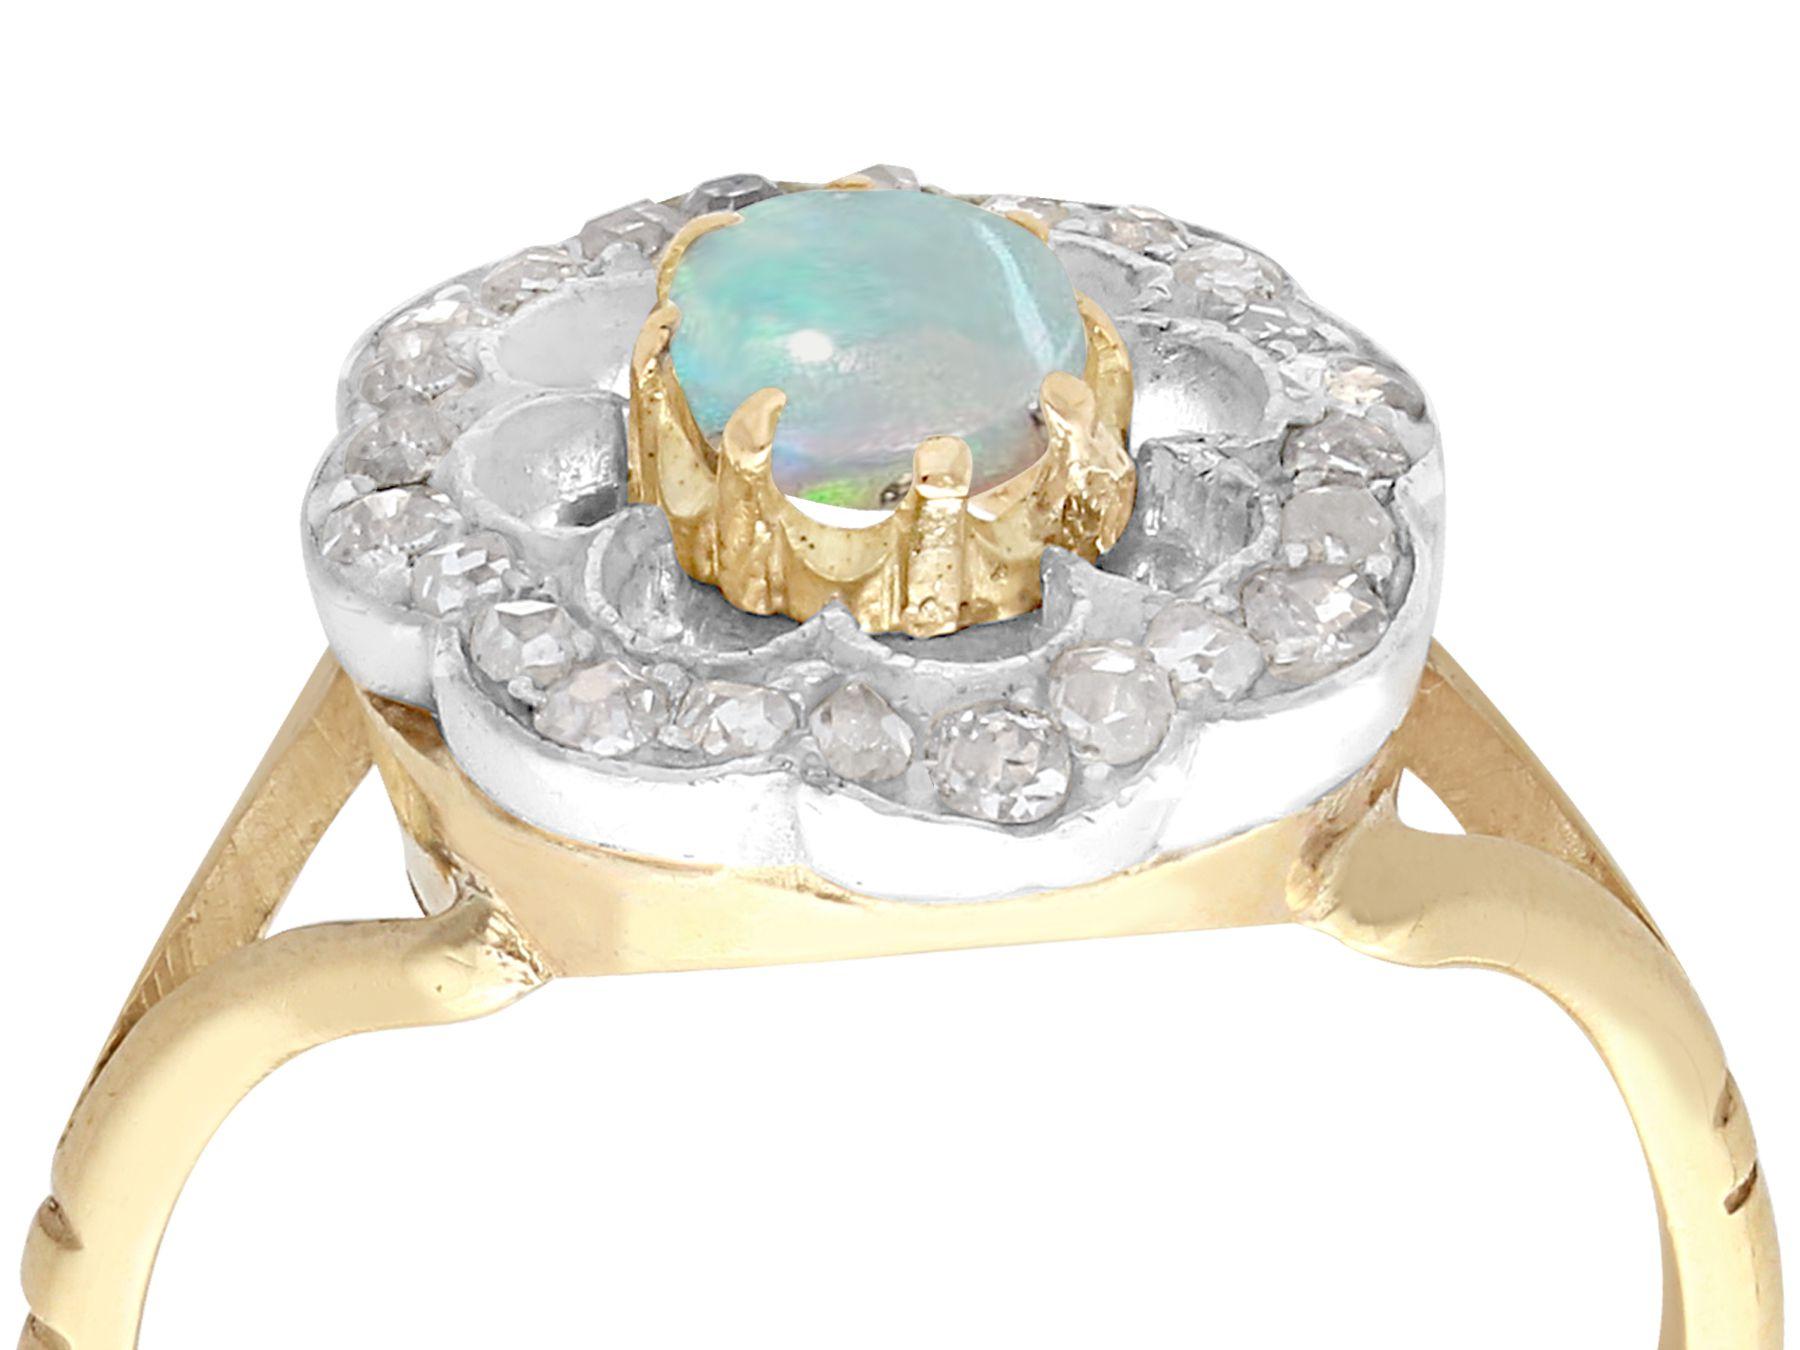 A fine and impressive antique 0.28 carat opal and 0.39 carat diamond, yellow gold and silver set dress ring; part of our diverse antique jewelry and estate jewelry collections.

This fine and impressive antique cabochon cut opal ring has been